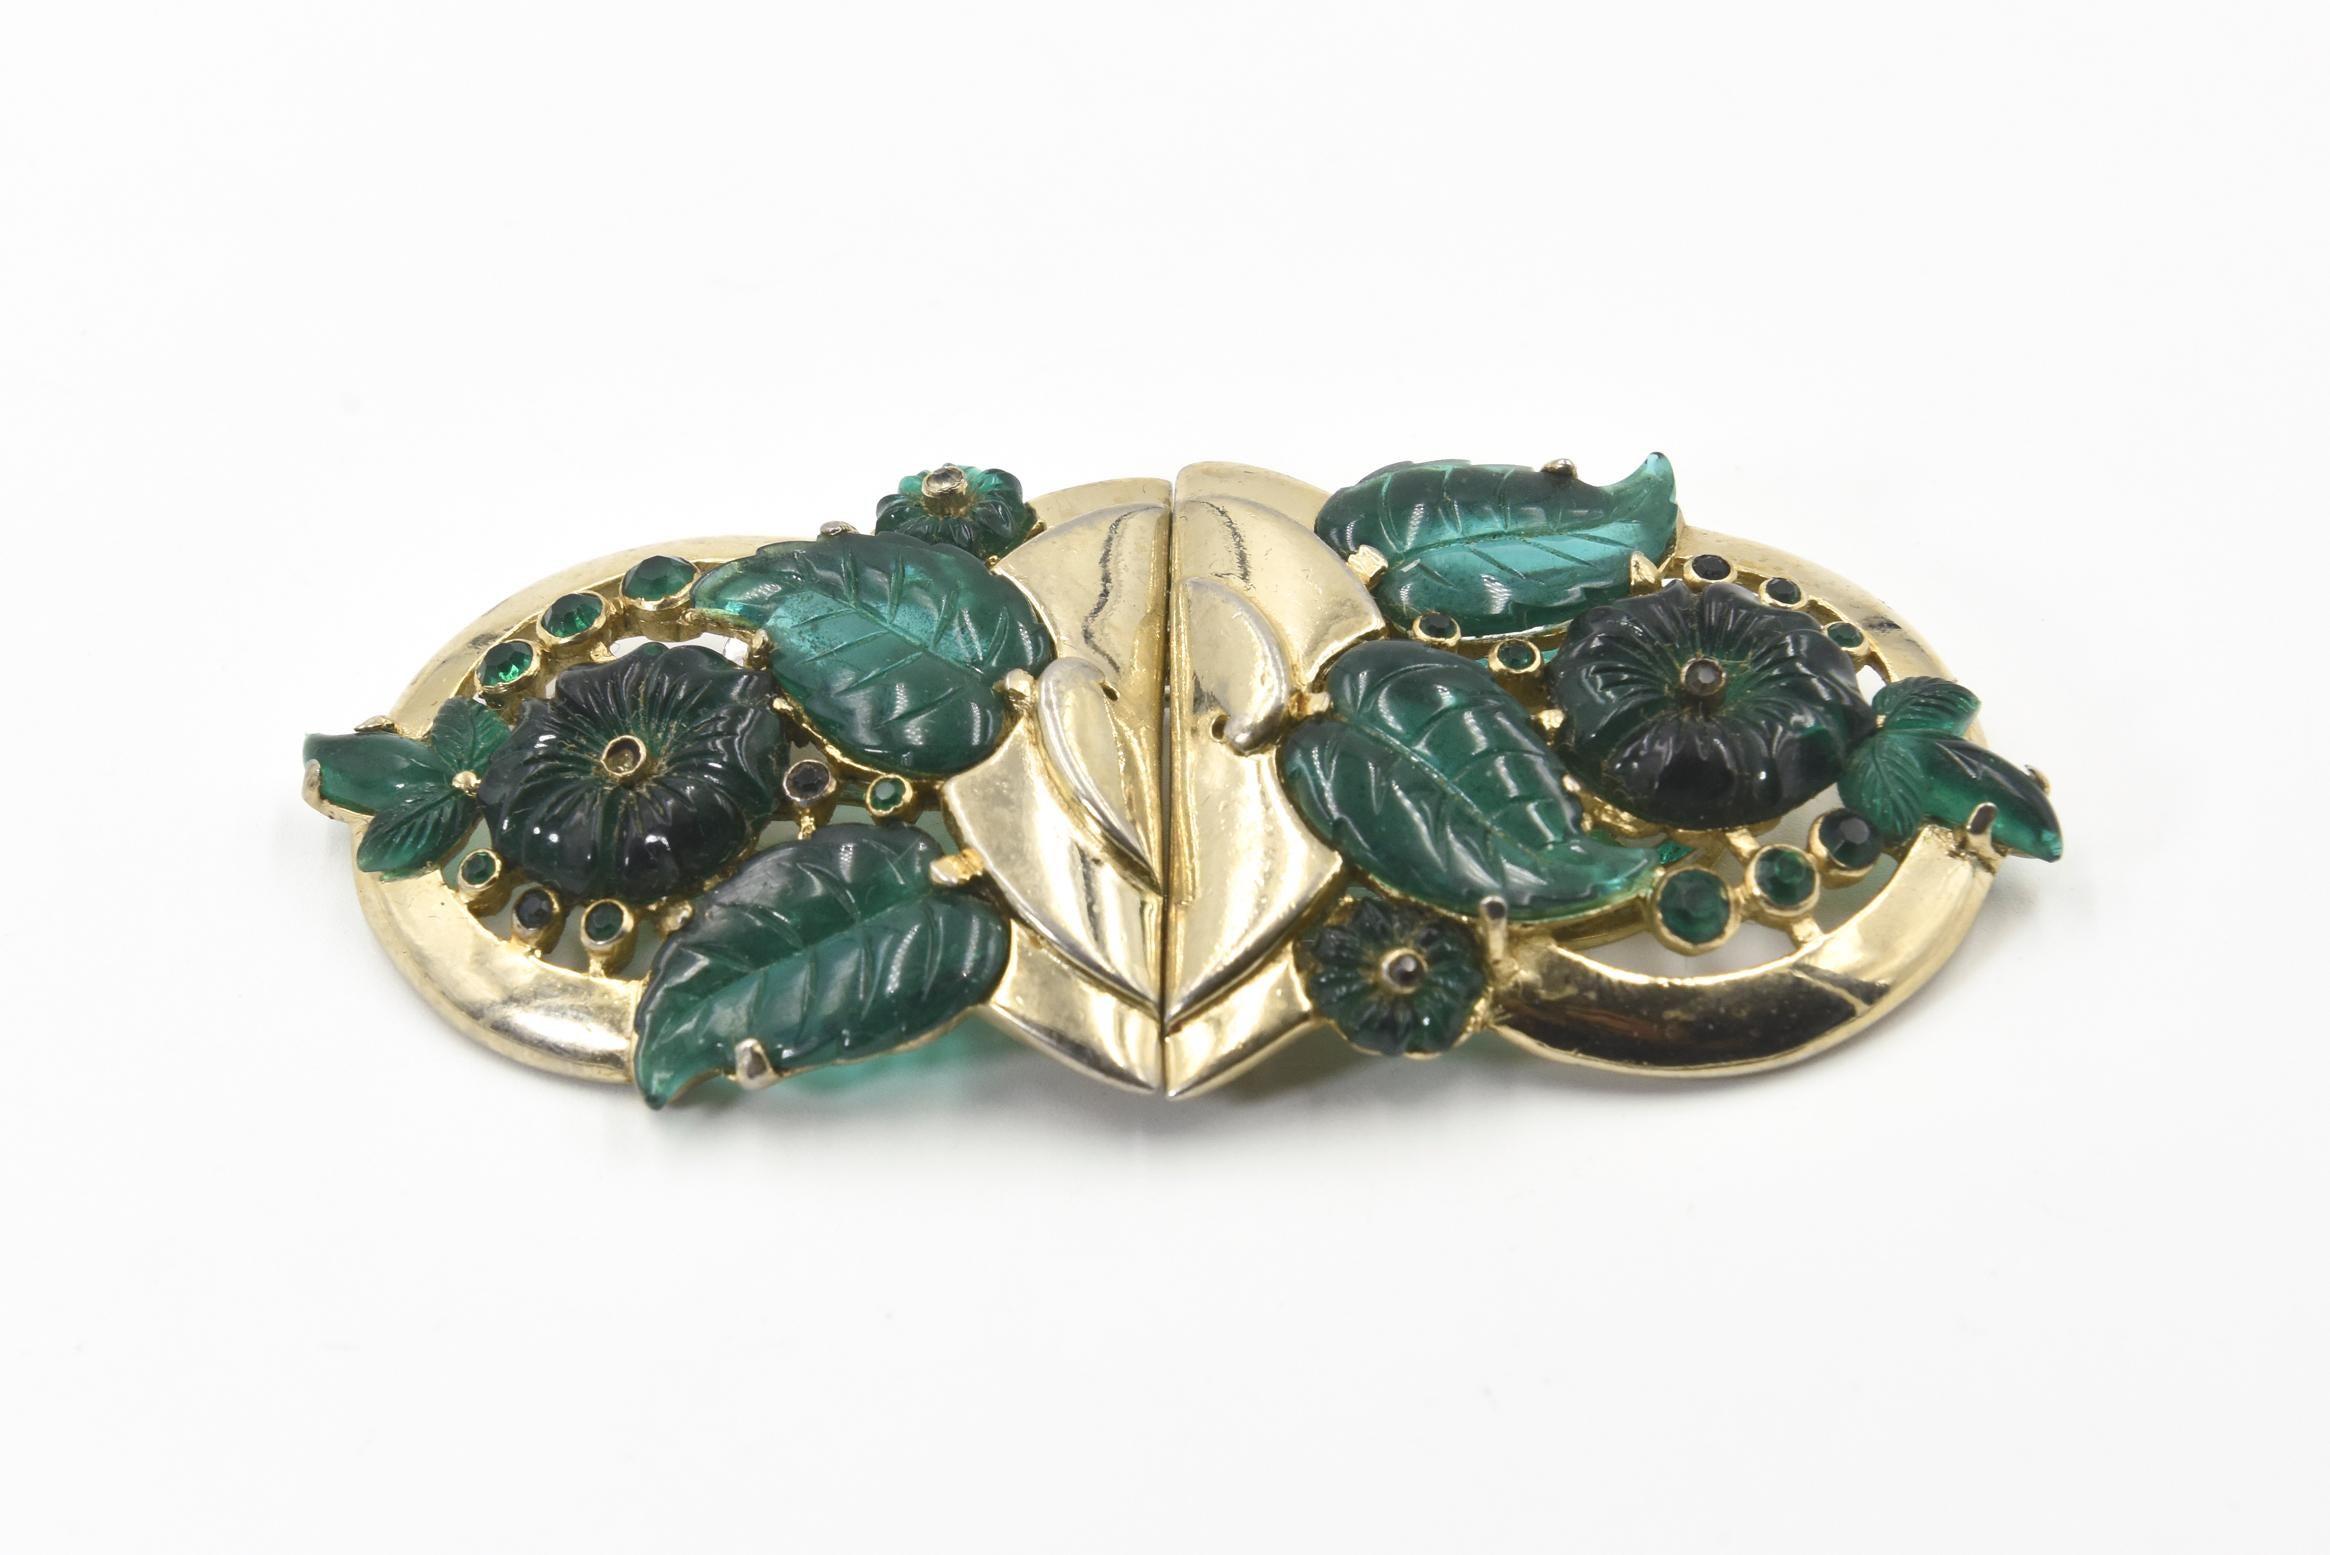 Rare vintage Art Deco Coro duette dress fur clips brooch featuring an emerald fruit salad design with flowers & leaves in a gold tone brooch. Pat. 1798867 & Coro Duette on the clip.  It can be worn as one brooch or removed from duette mount and worn